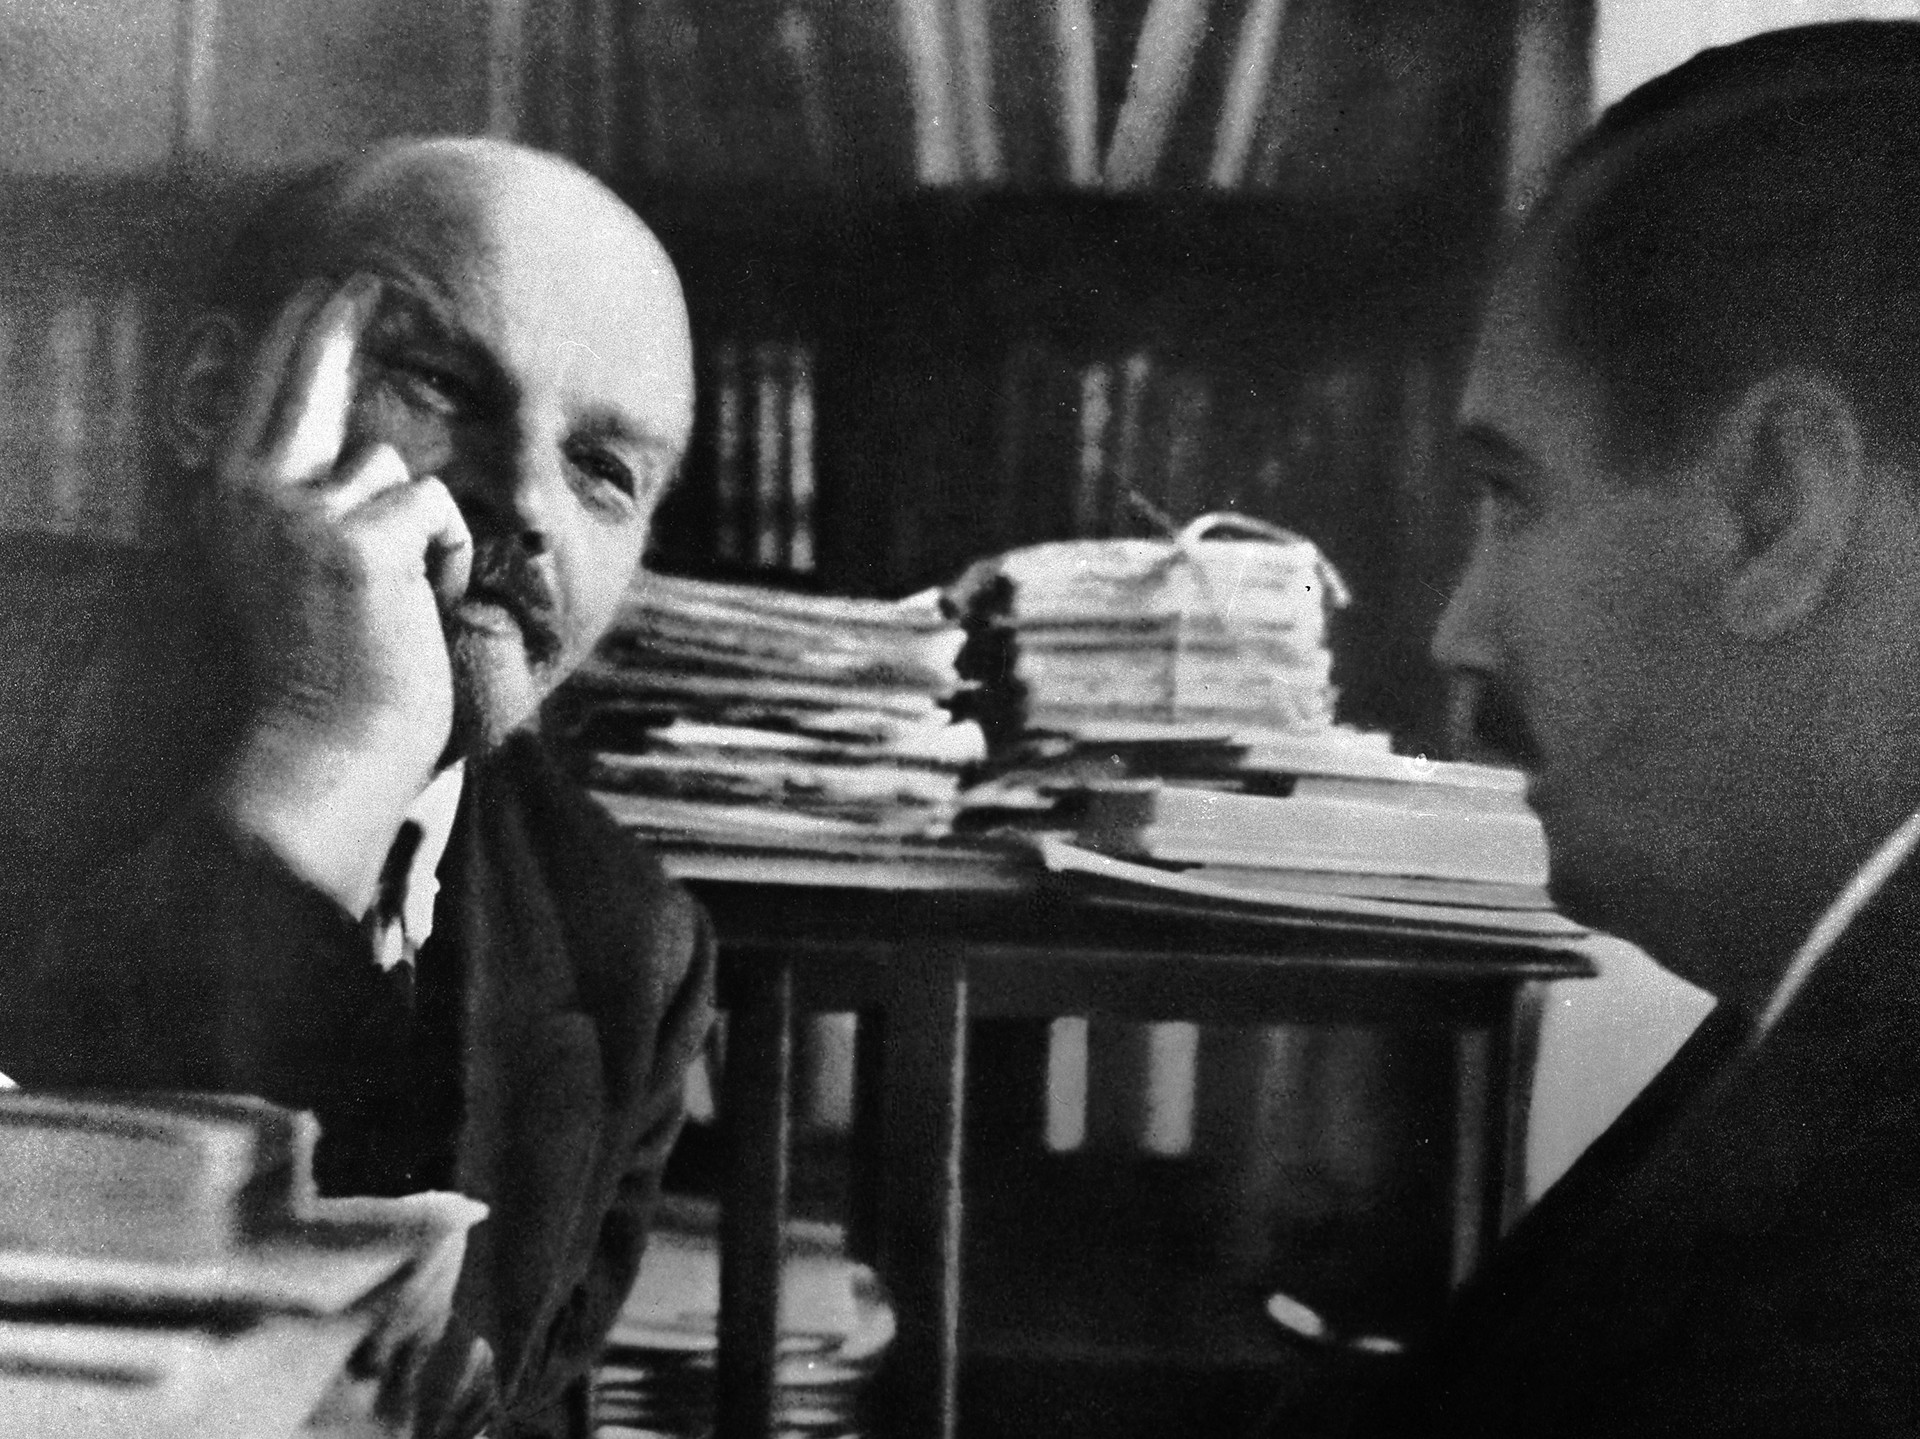 According to Wells, Lenin had a “pleasant, quick-changing, brownish face, with a lively smile 